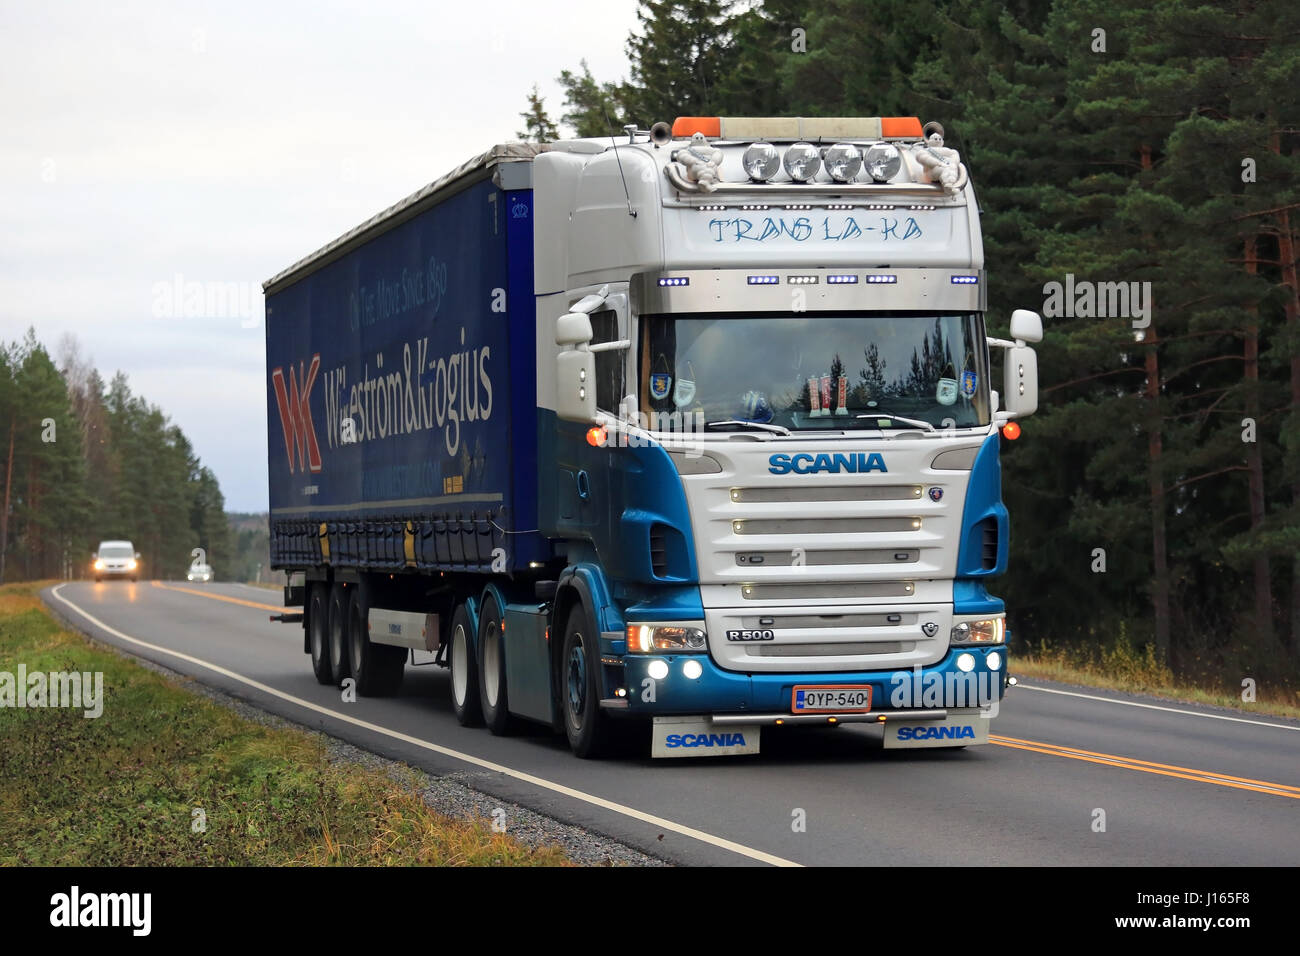 SALO, FINLAND - OCTOBER 30, 2016: Customized Scania R500 semi truck of Trans La-Ka hauls shipping trailer along rural road in South of Finland. Stock Photo